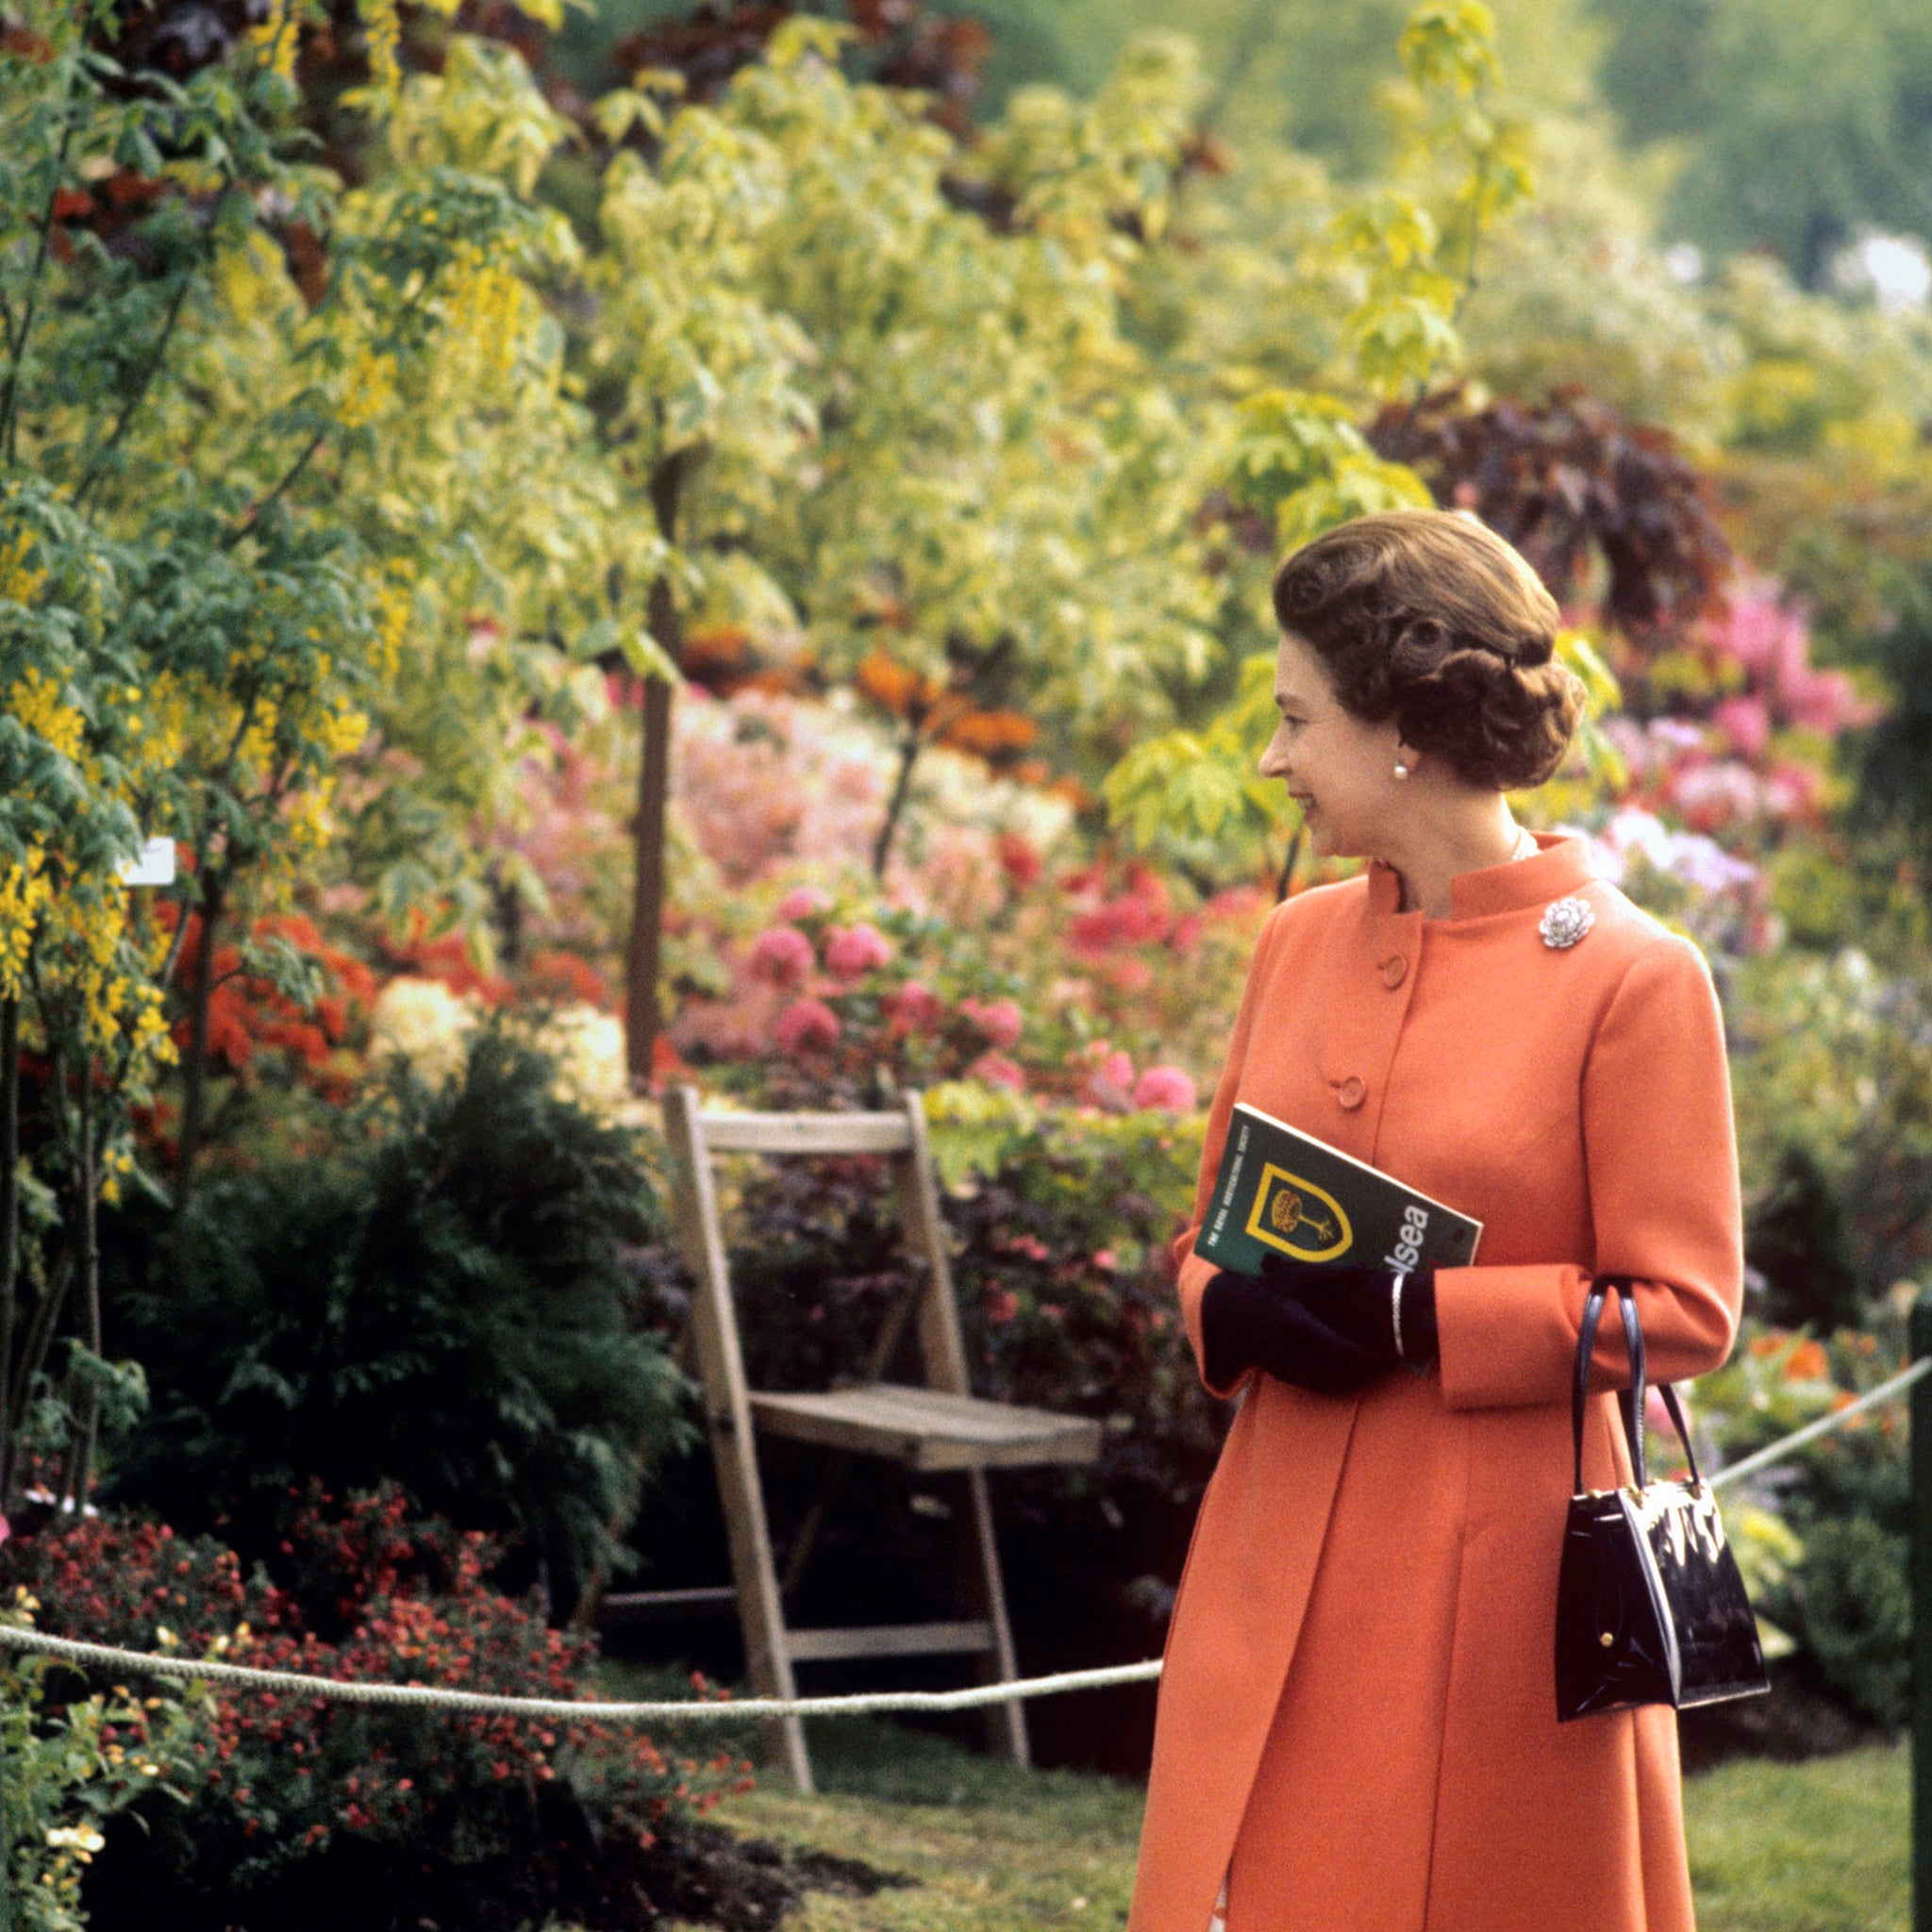 Queen Elizabeth II during her visit to the Chelsea Flower Show in London, a regular fixture in the royal calendar, 1971